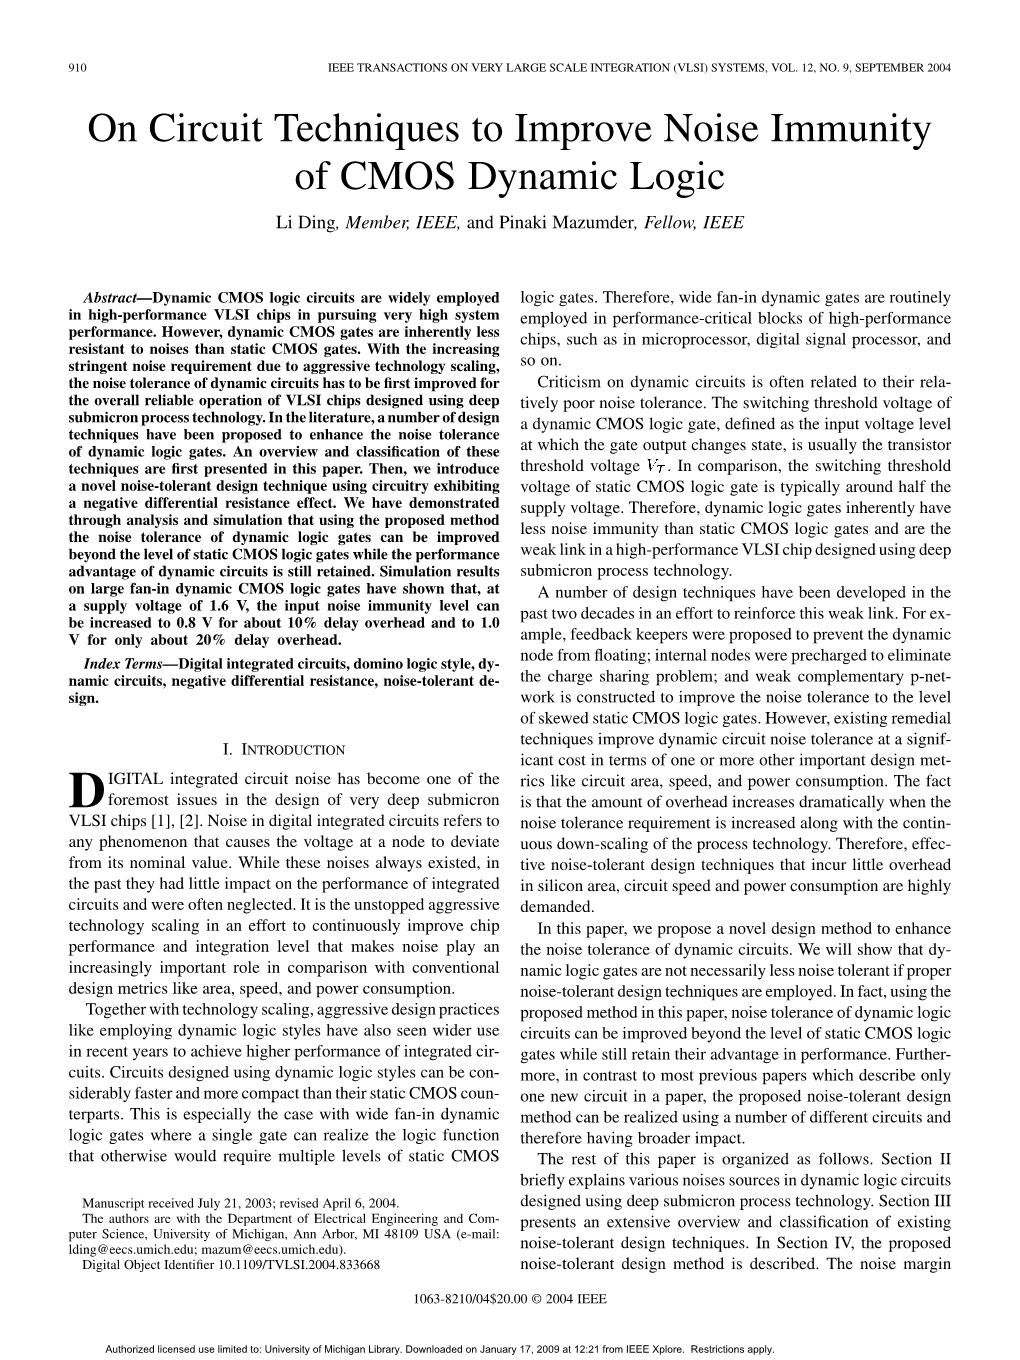 On Circuit Techniques to Improve Noise Immunity of CMOS Dynamic Logic Li Ding, Member, IEEE, and Pinaki Mazumder, Fellow, IEEE